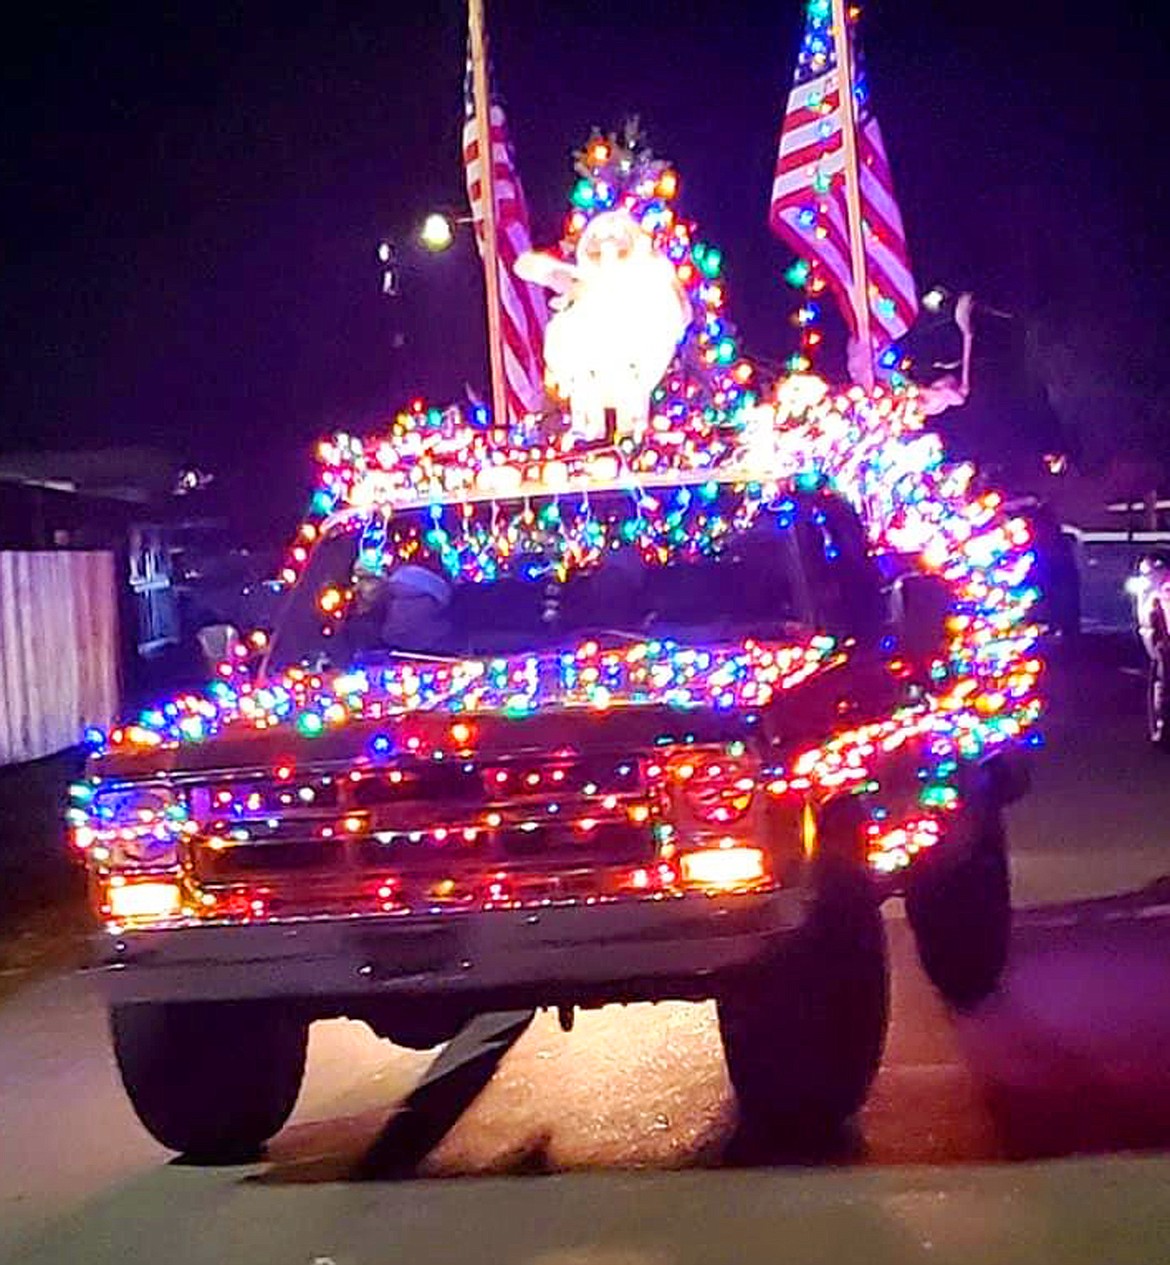 One of nearly 50 entries in Rathdrum's Christmas parade drives on the route around town Saturday.